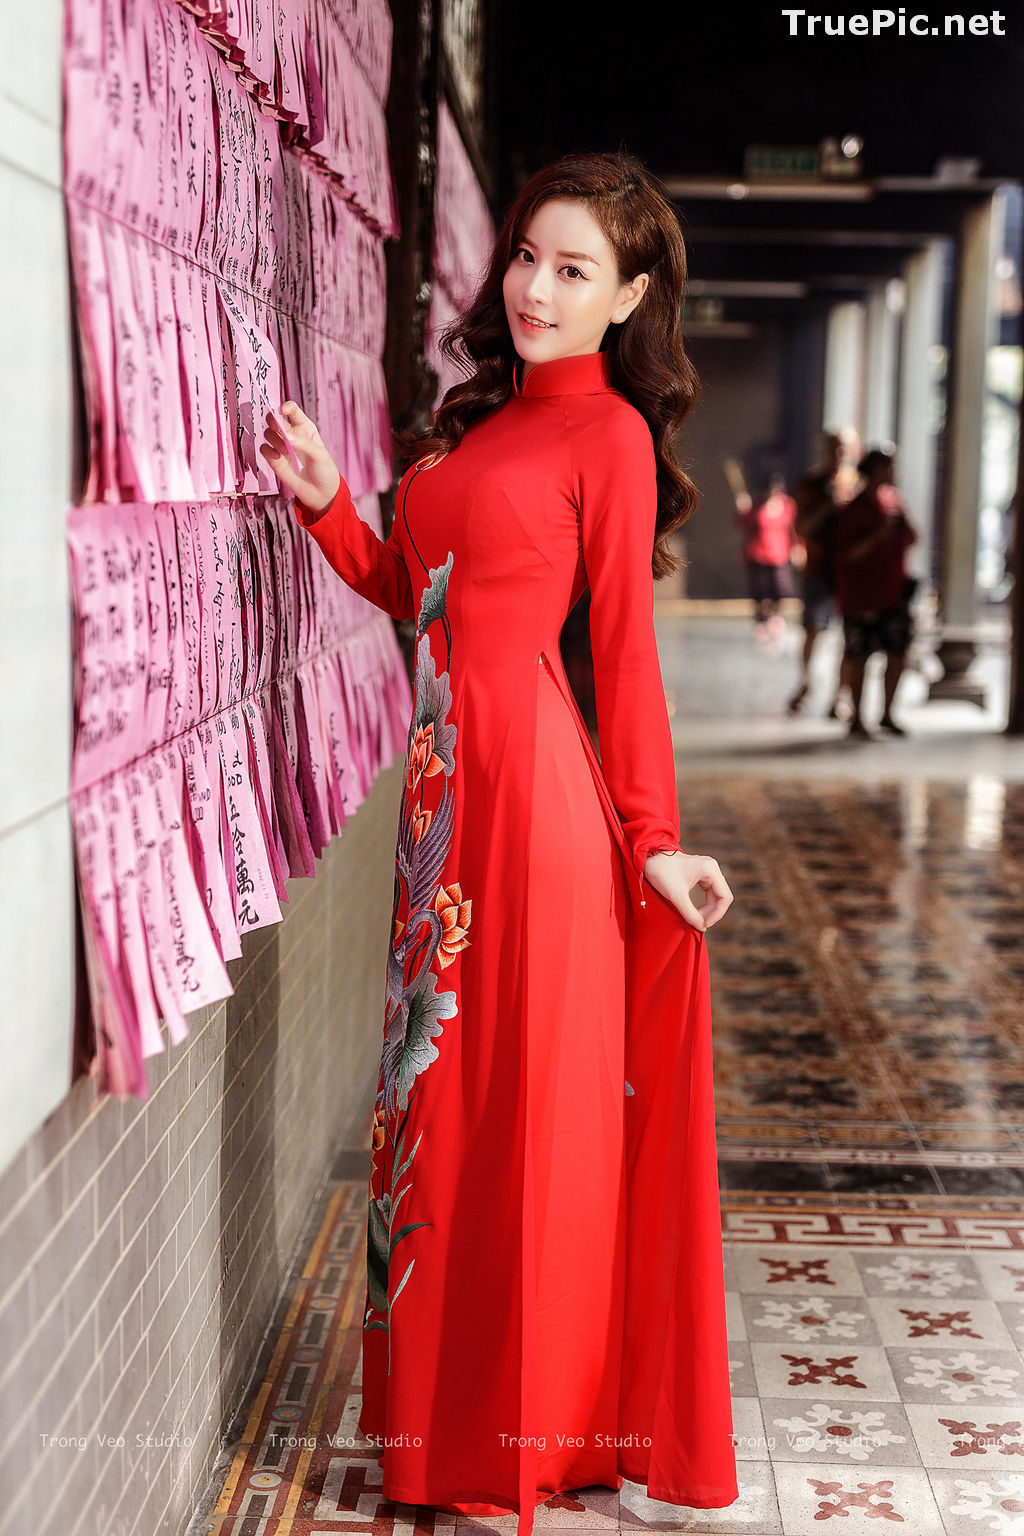 Image The Beauty of Vietnamese Girls with Traditional Dress (Ao Dai) #4 - TruePic.net - Picture-19